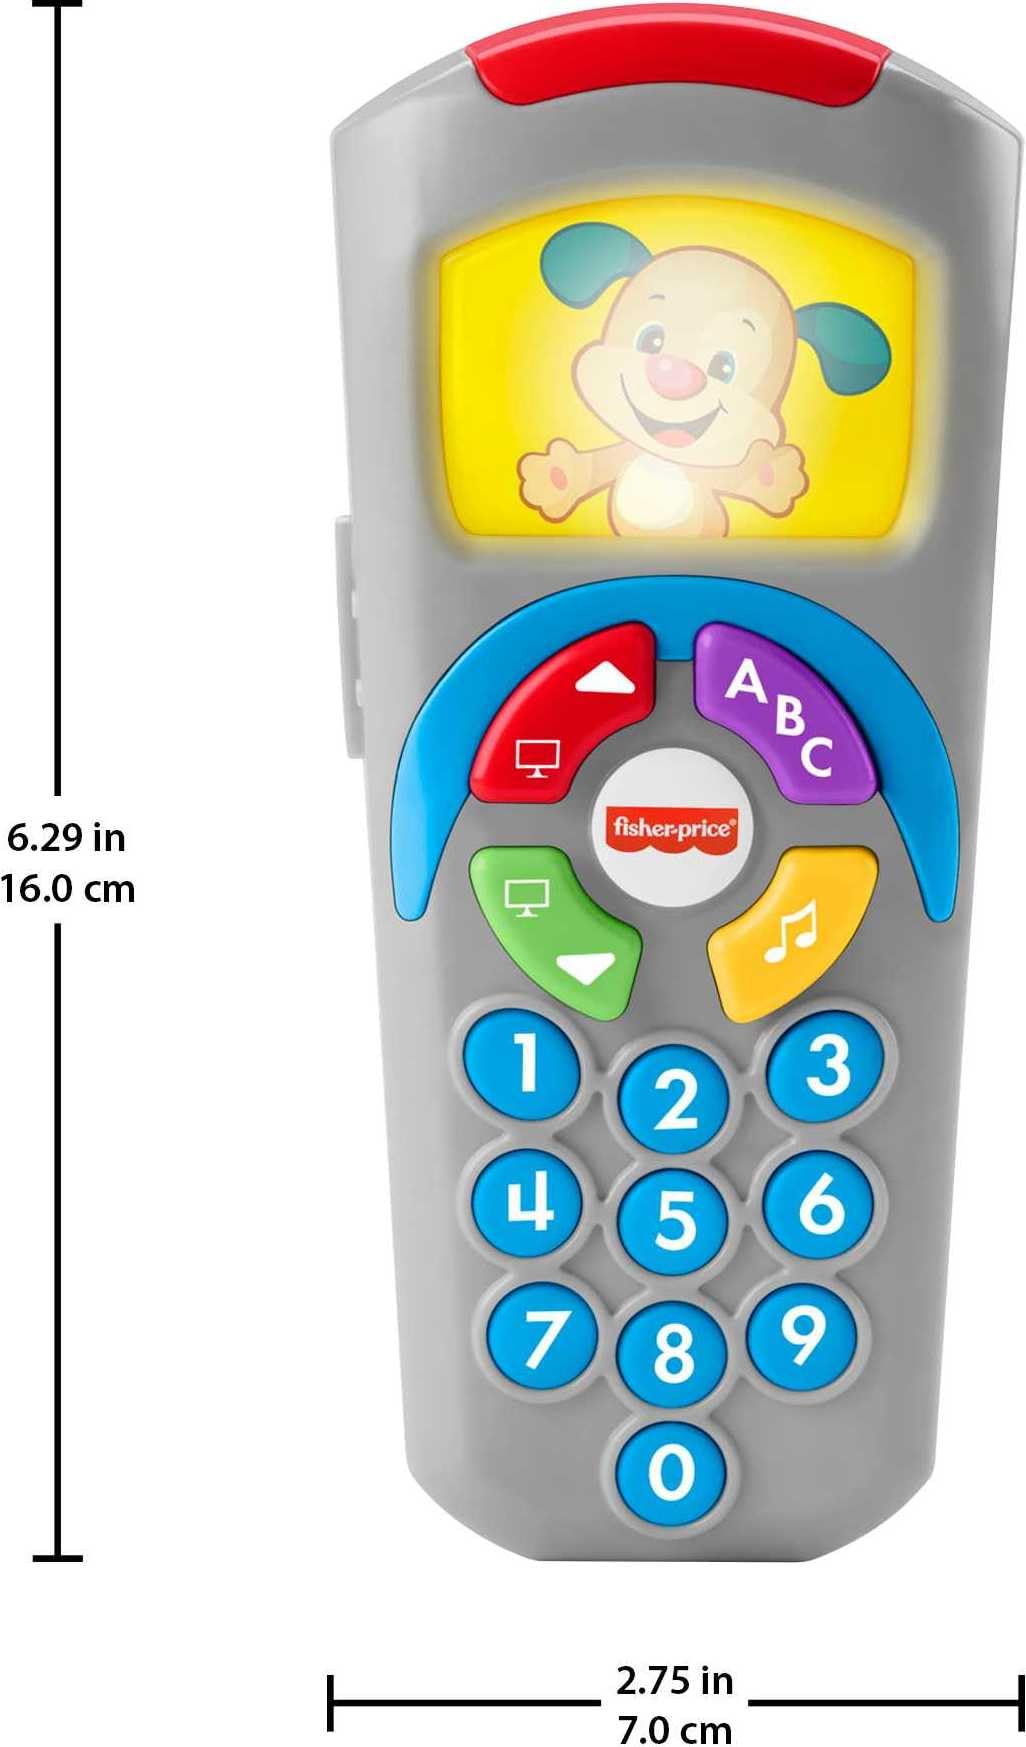 Fisher-Price Laugh & Learn Baby Learning Toy Puppy’s Remote Pretend TV Control with Music and Lights for Ages 6+ Months